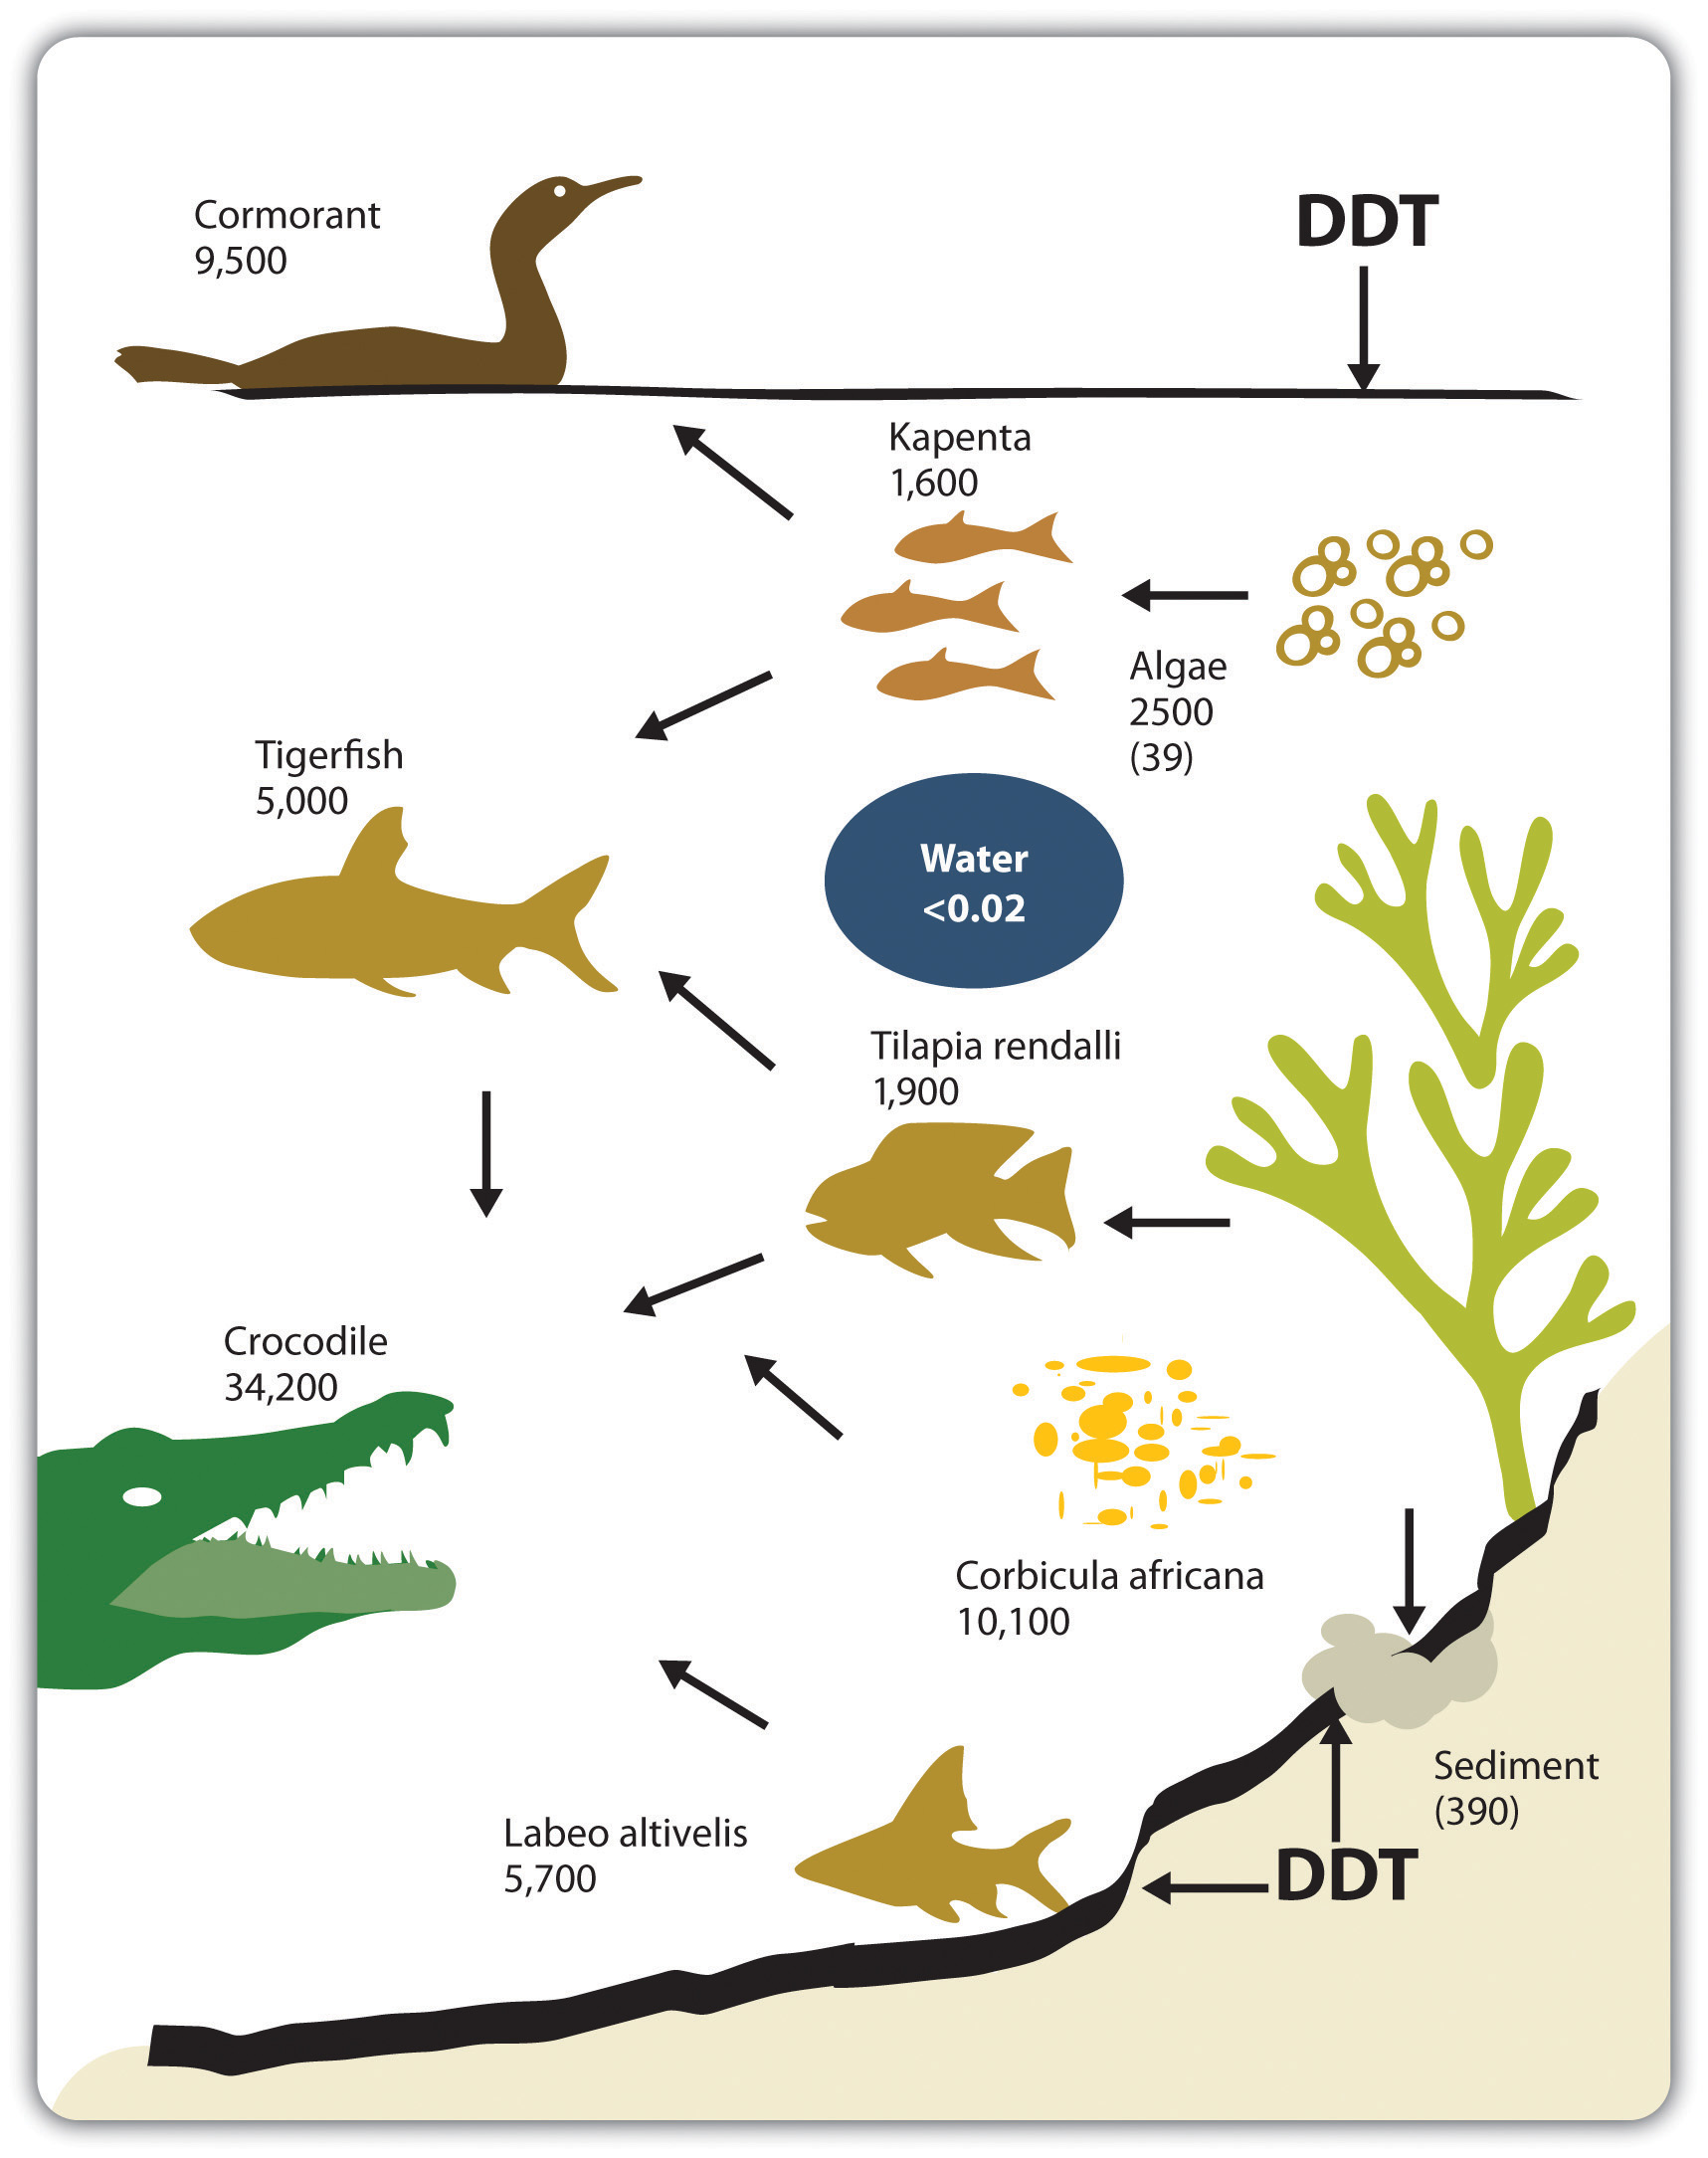 DDT Accumulation in the Food Chain. DDT levels, shown in nanograms per gram of body fat for animals in Lake Kariba in Zimbabwe, accumulate in the food chain. The lowest amount of DDT can be found in algae at 2500 and the highest is in crocodiles at 34,200.